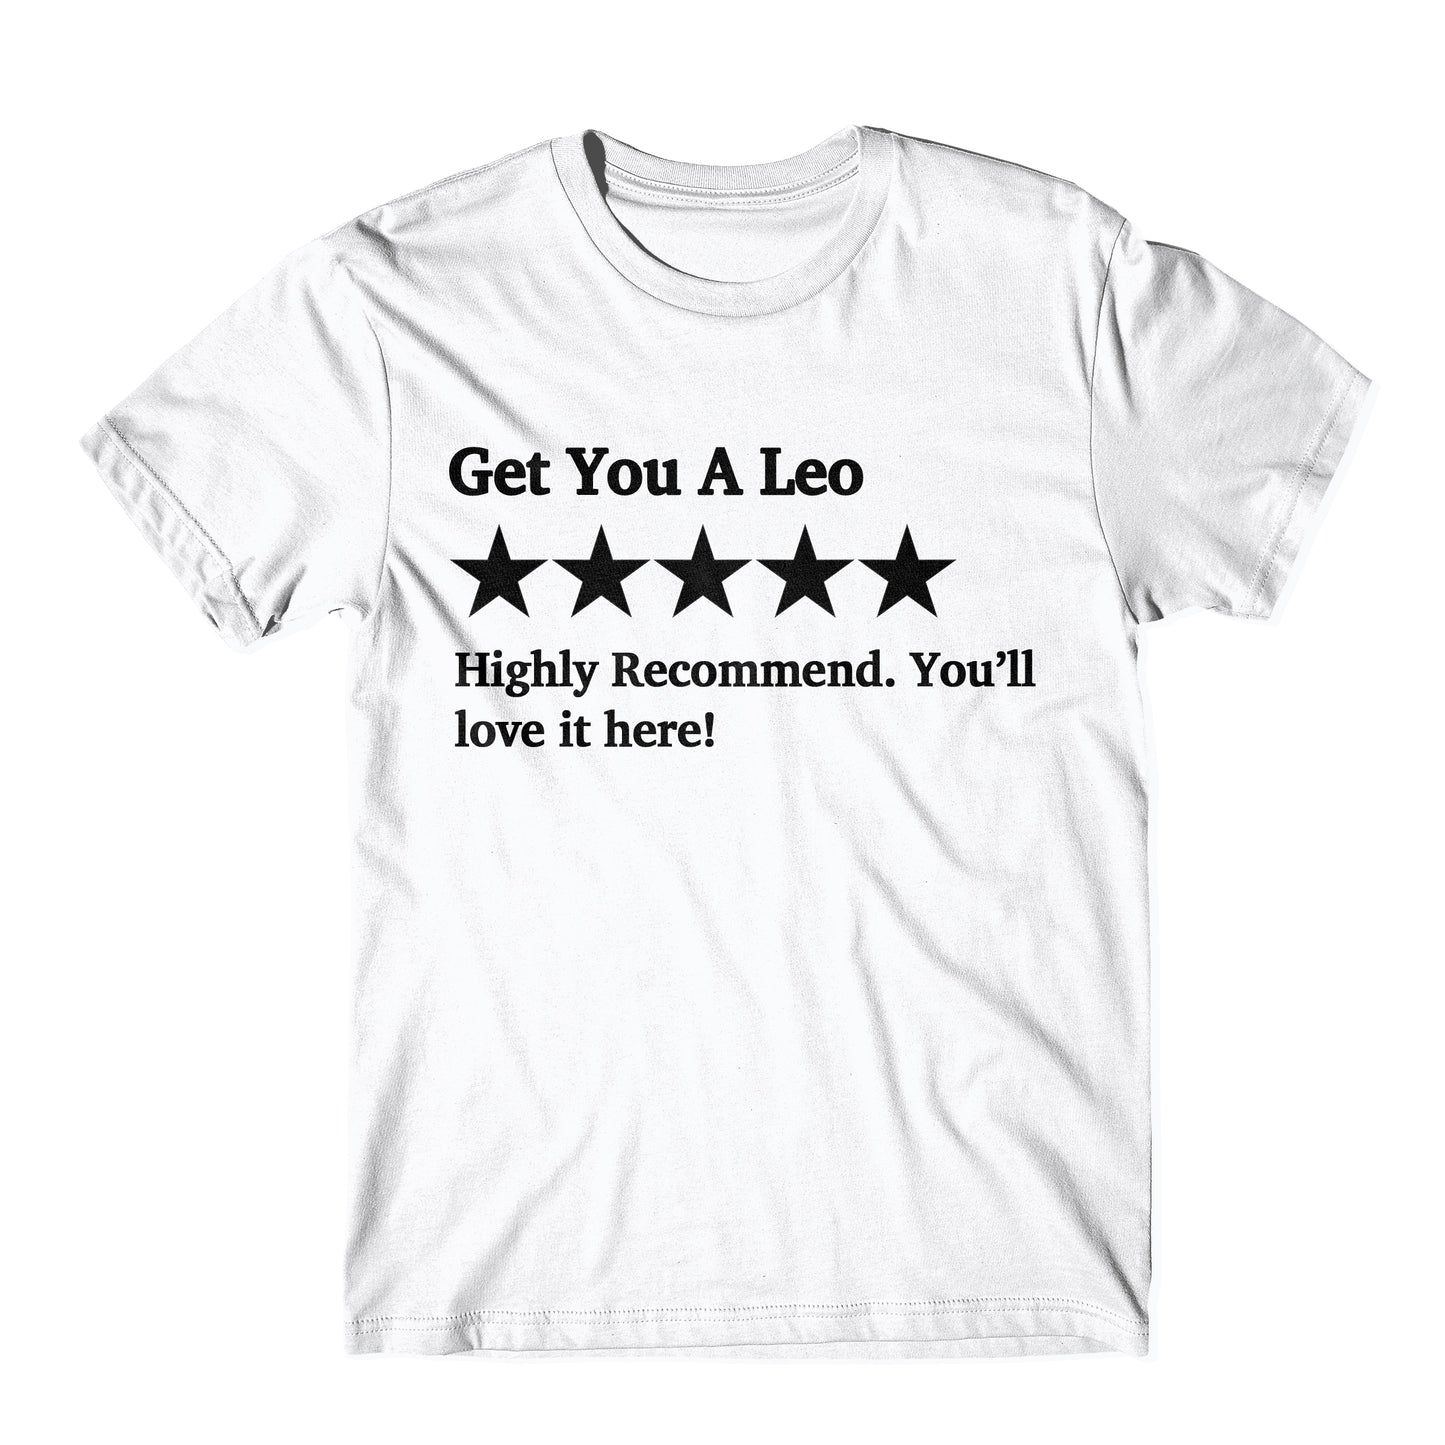 "Get You A Leo Five Star Rating" Tee